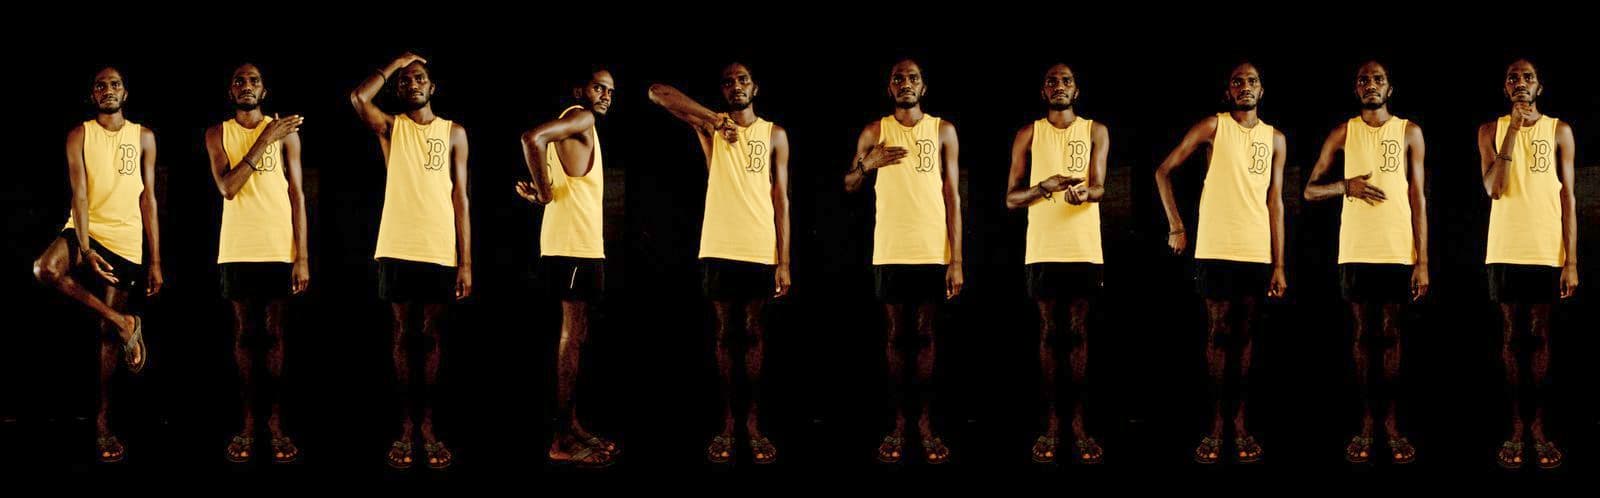 A wide long photograph / still from a film with a First Nations man, wearing a yellow singlet and black shorts signing